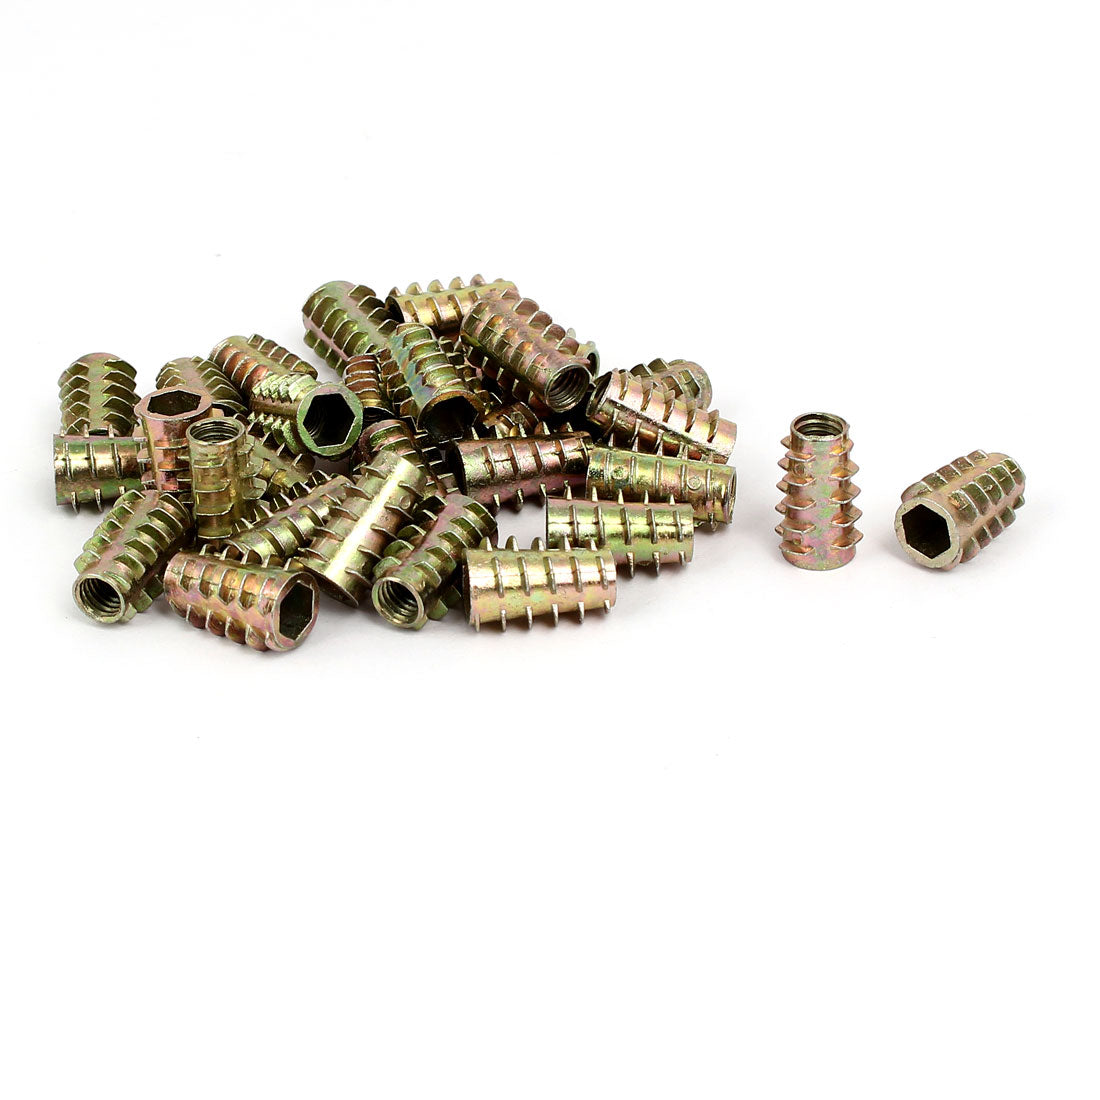 uxcell Uxcell M6x18mm Hex Socket Threaded Insert Nuts Bronze Tone 30pcs for Wood Furniture